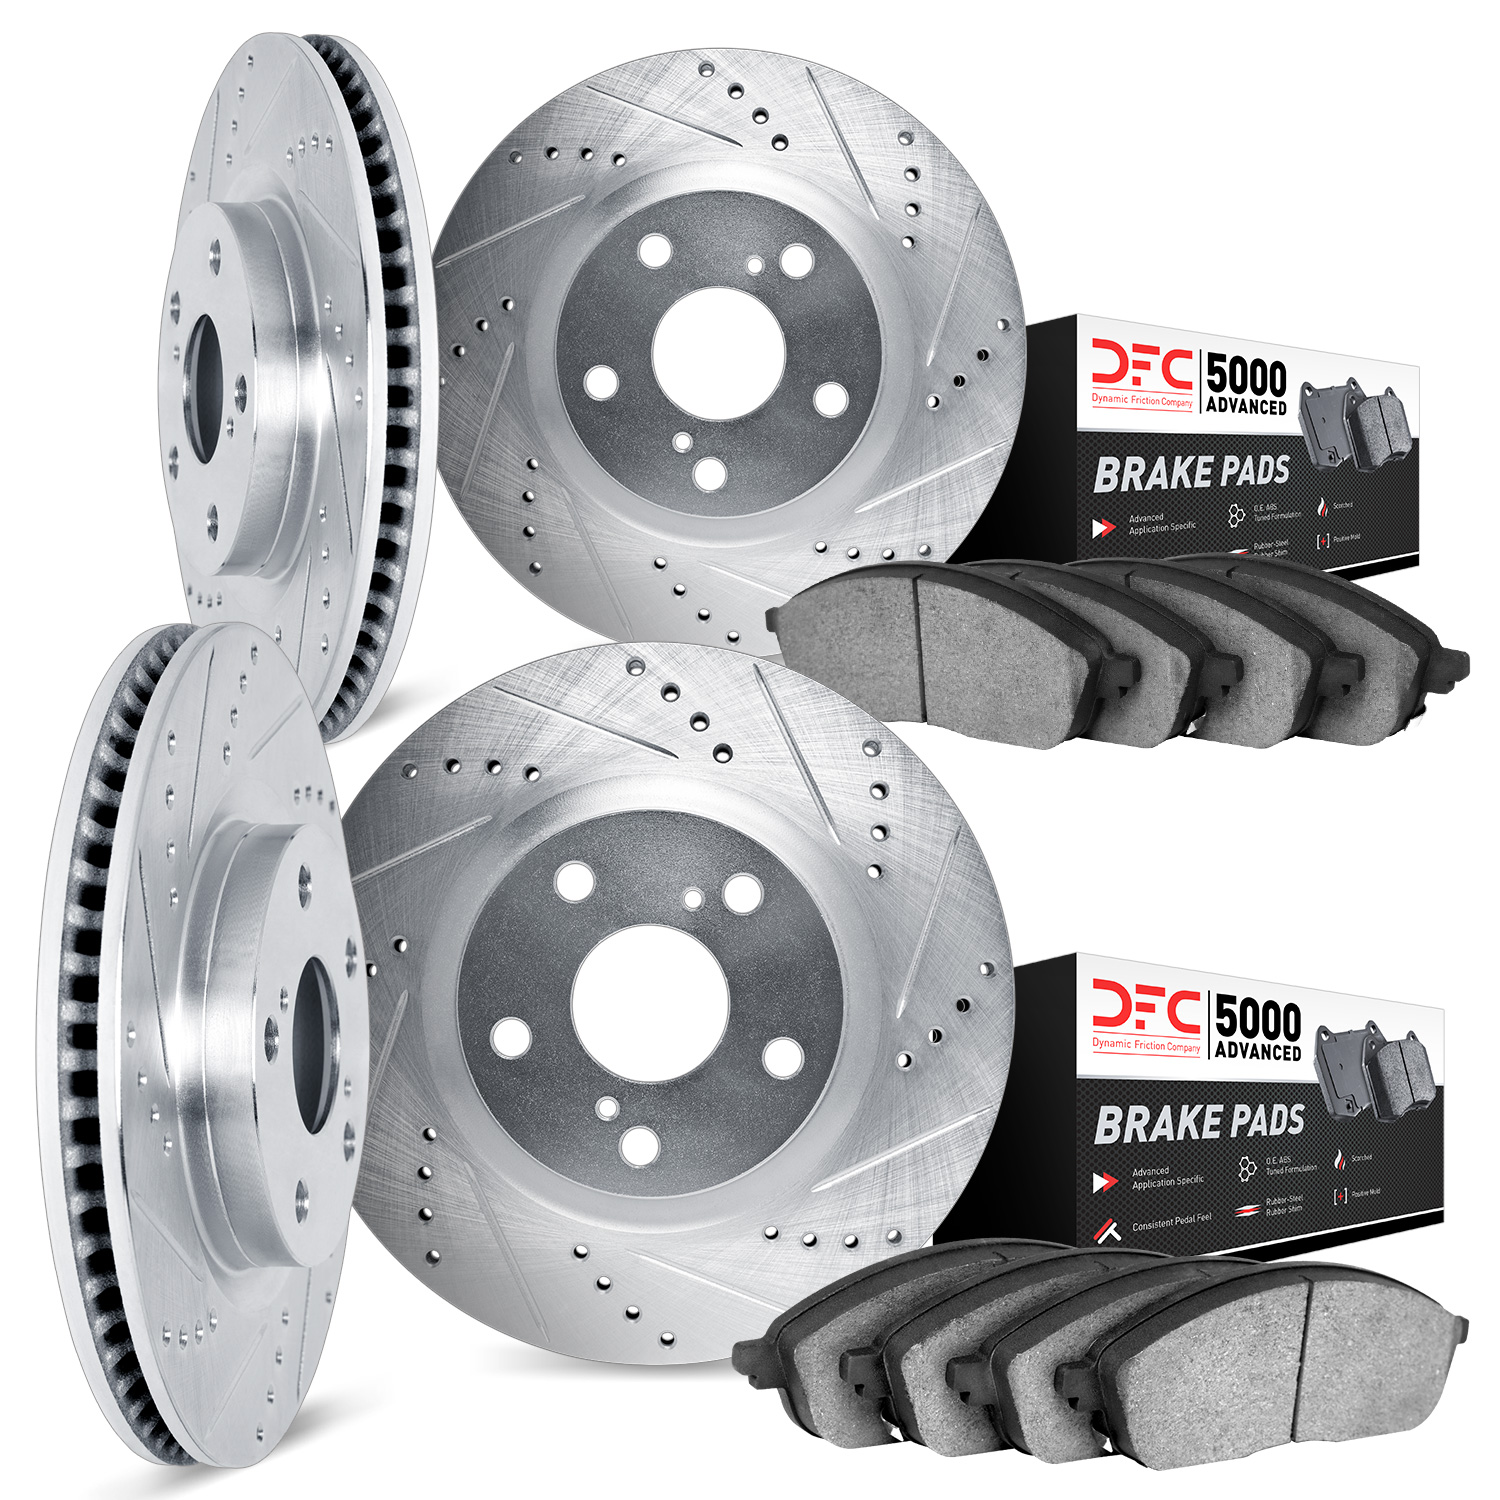 7504-31054 Drilled/Slotted Brake Rotors w/5000 Advanced Brake Pads Kit [Silver], 2016-2020 BMW, Position: Front and Rear